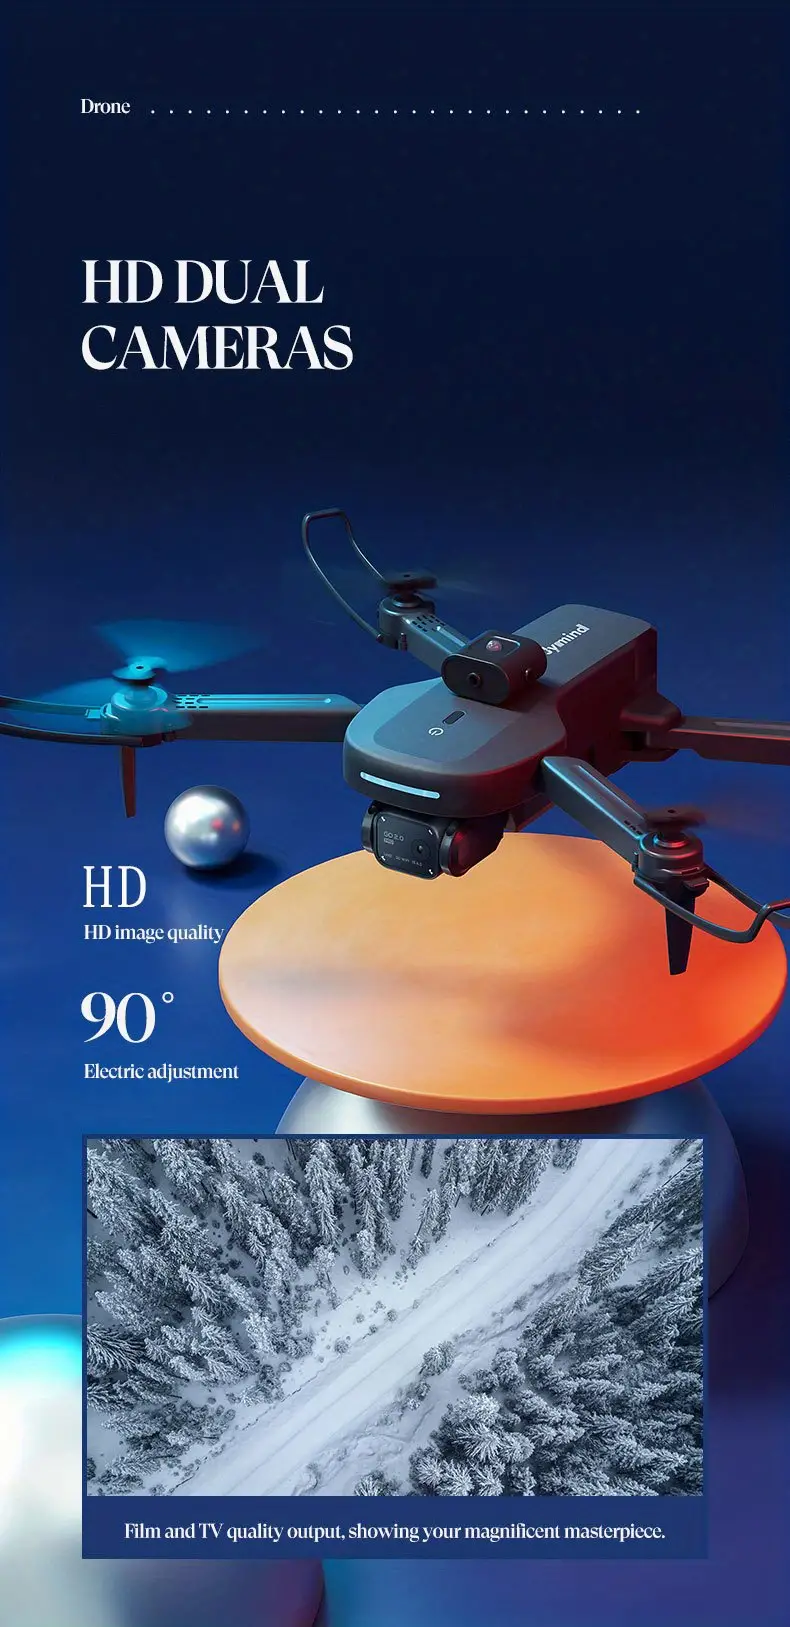 intelligent follow drone with dual esc camera laser obstacle avoidance 360 surrounding flight real time transmission stable flight optical flow position gesture shooting details 2